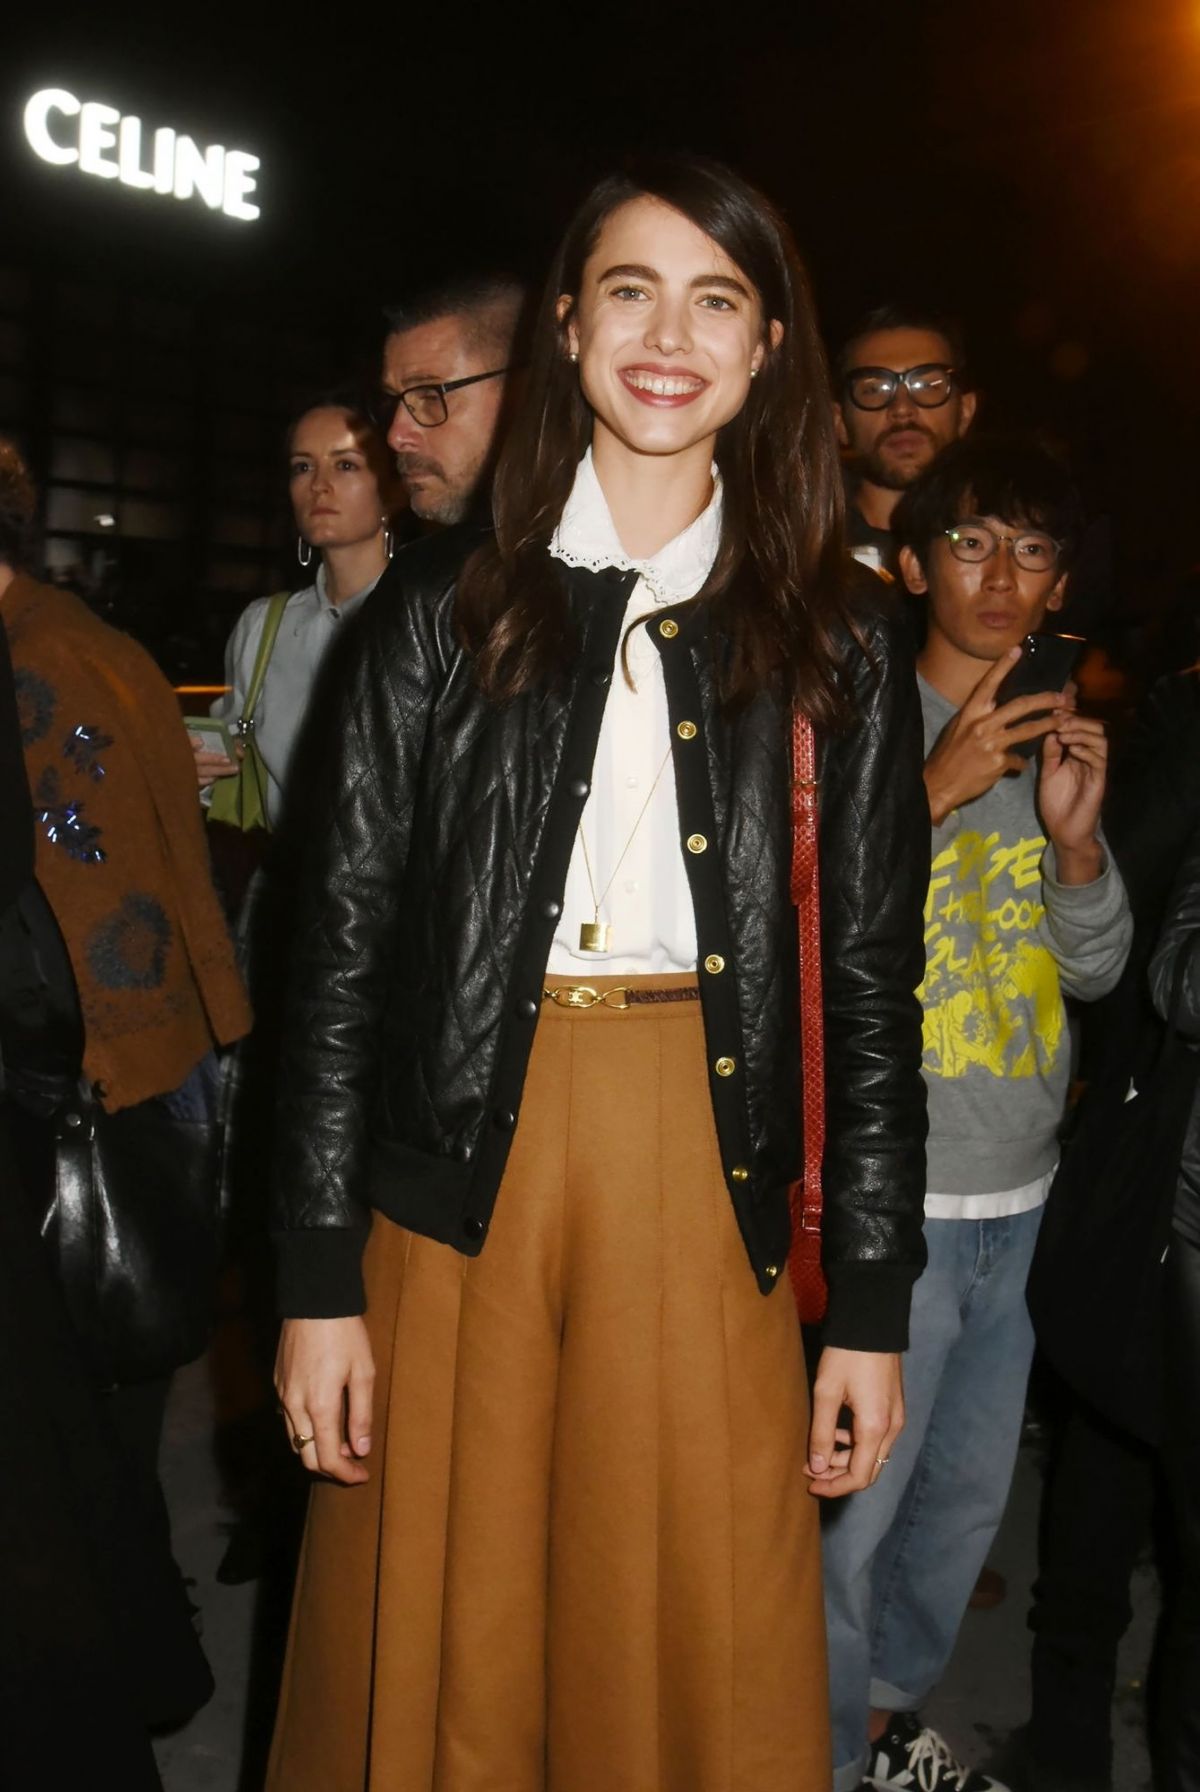 MARGARET QUALLEY at Celine Fashion Show at PFW in Paris 09/27/2019 ...